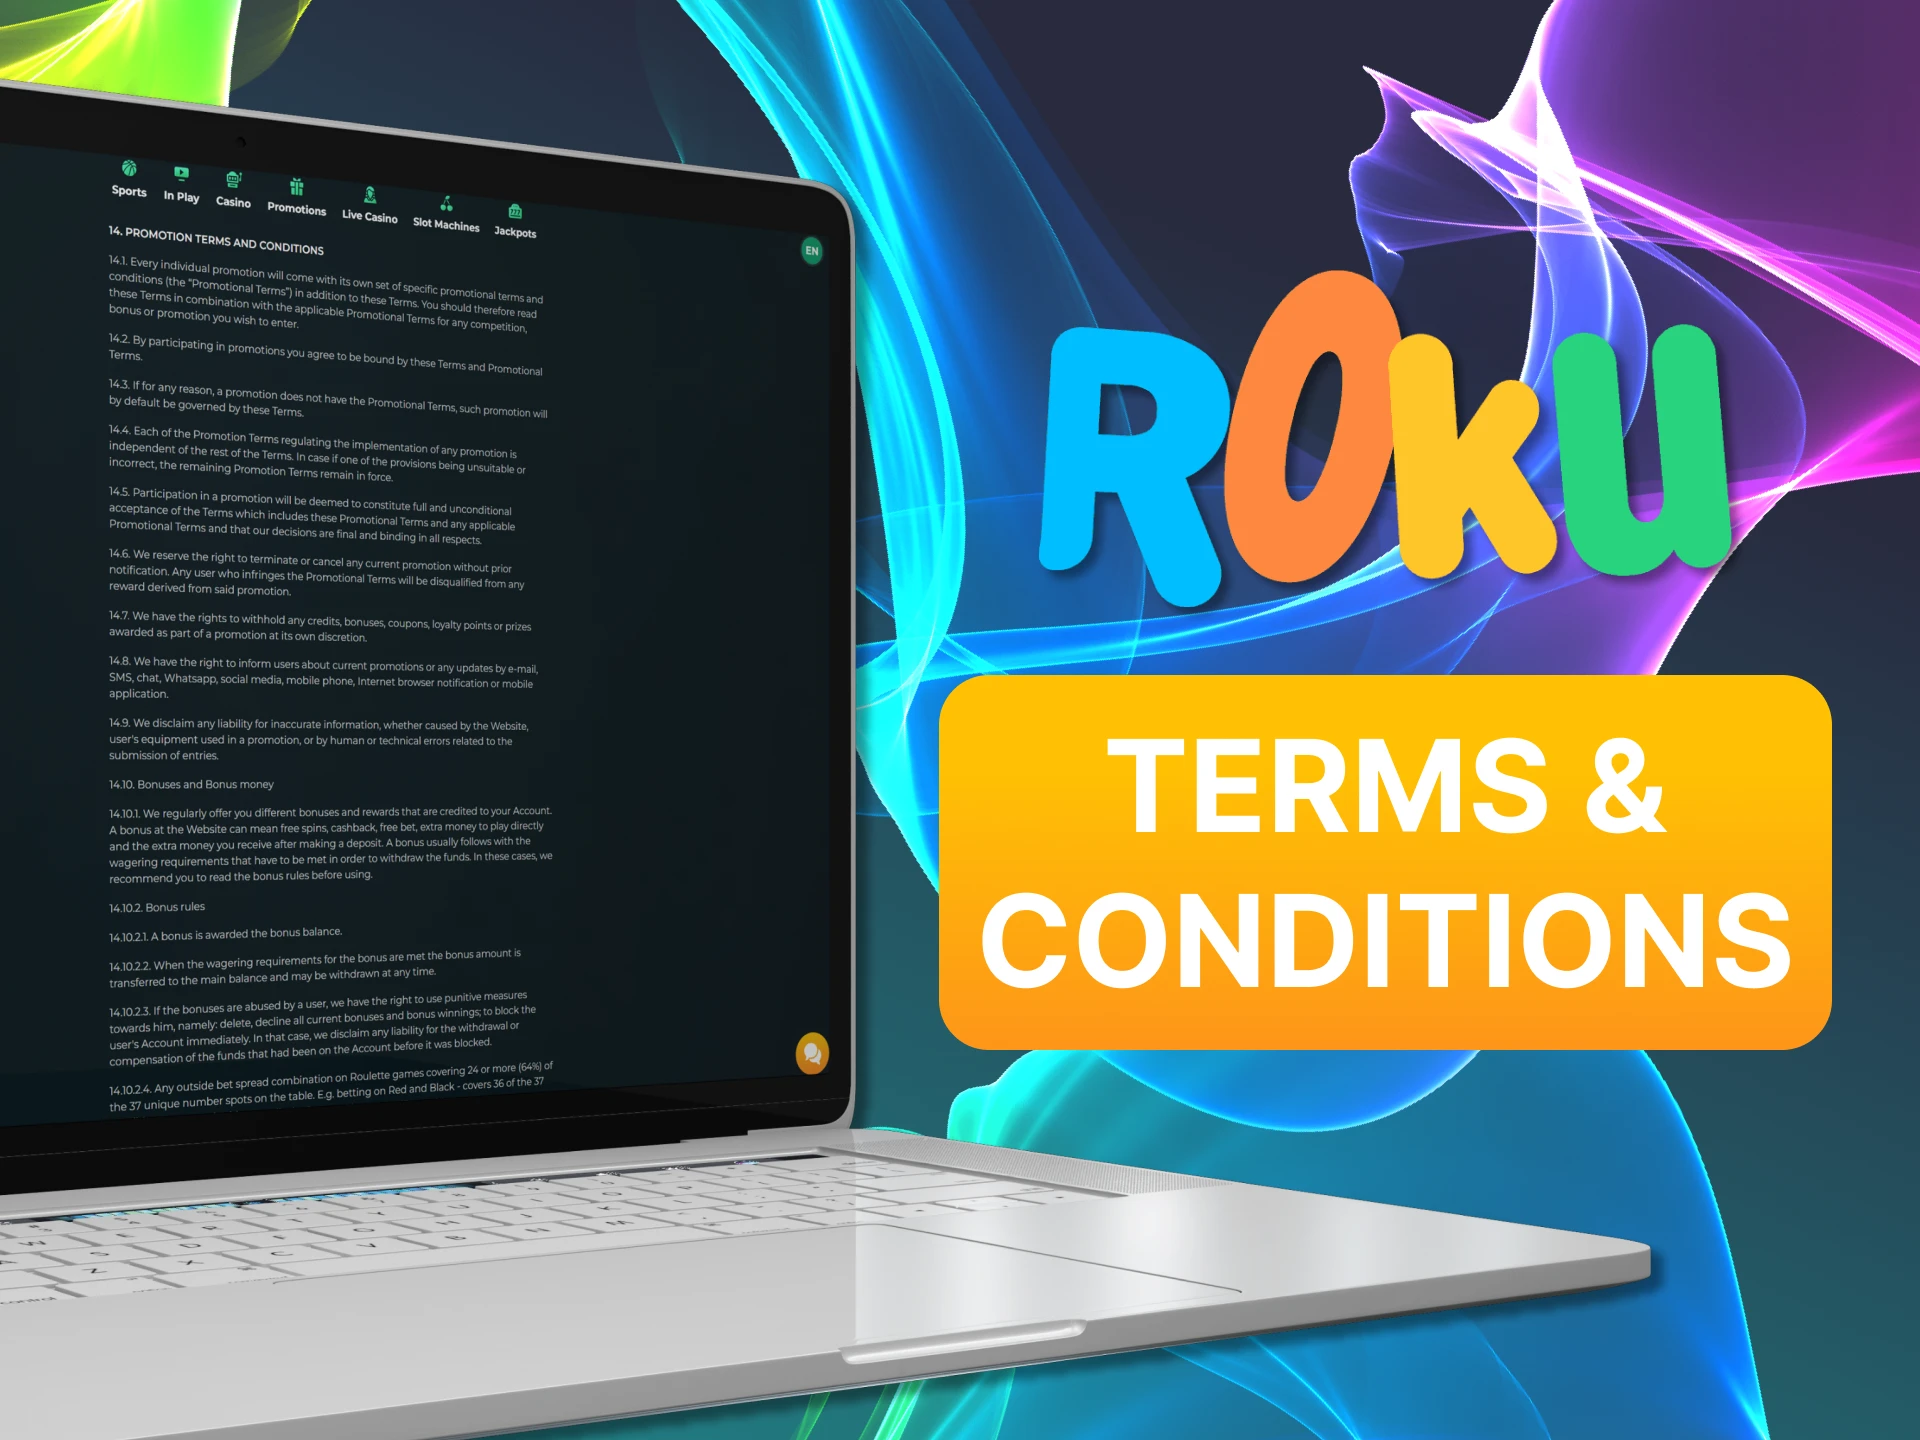 Get to know Rokubet's terms and conditions.